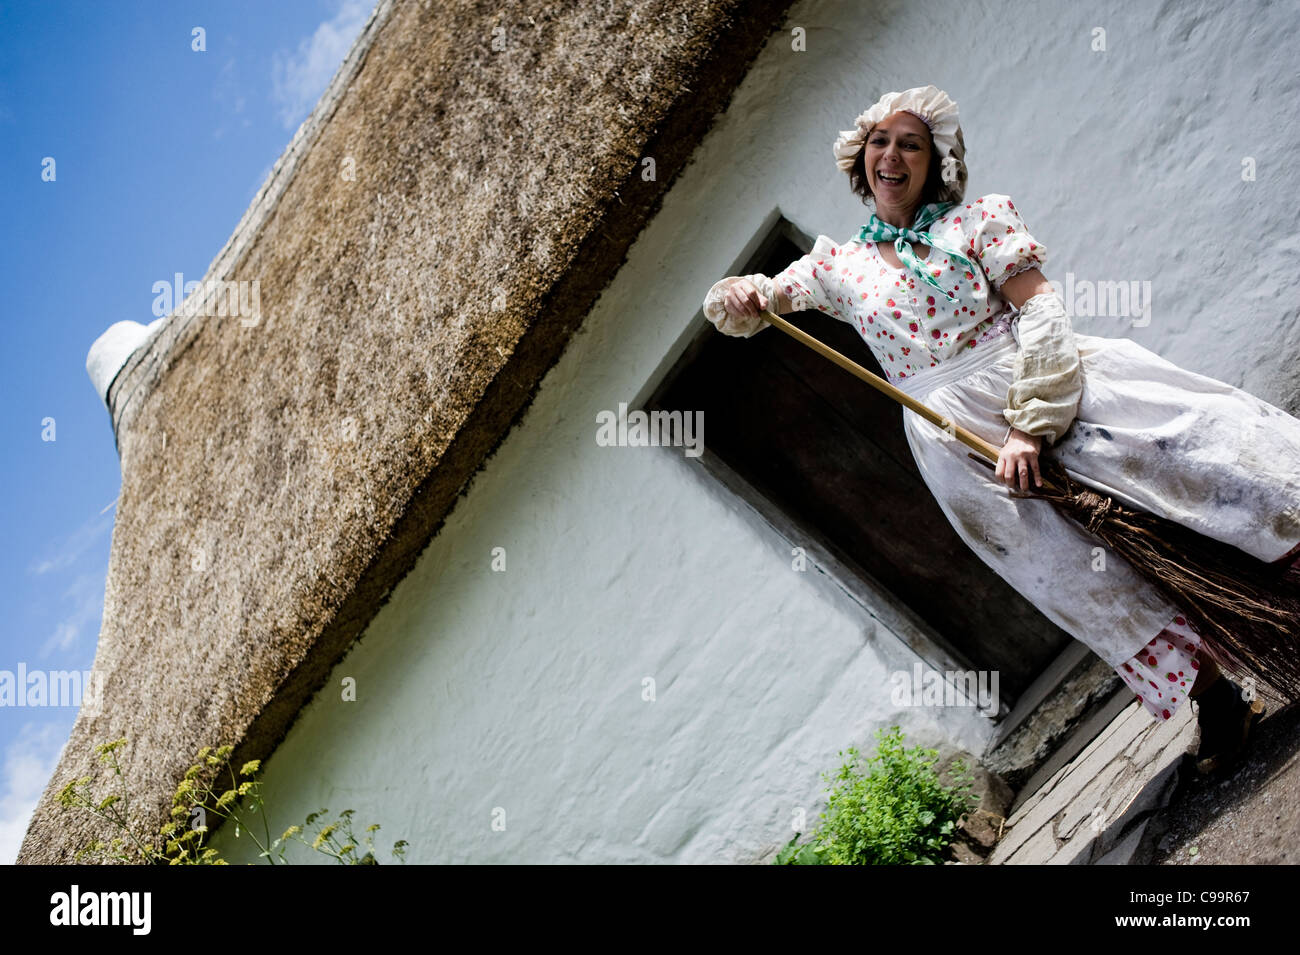 St Fagans National History Museum. CARDIFF, Gales. Wales. Stock Photo